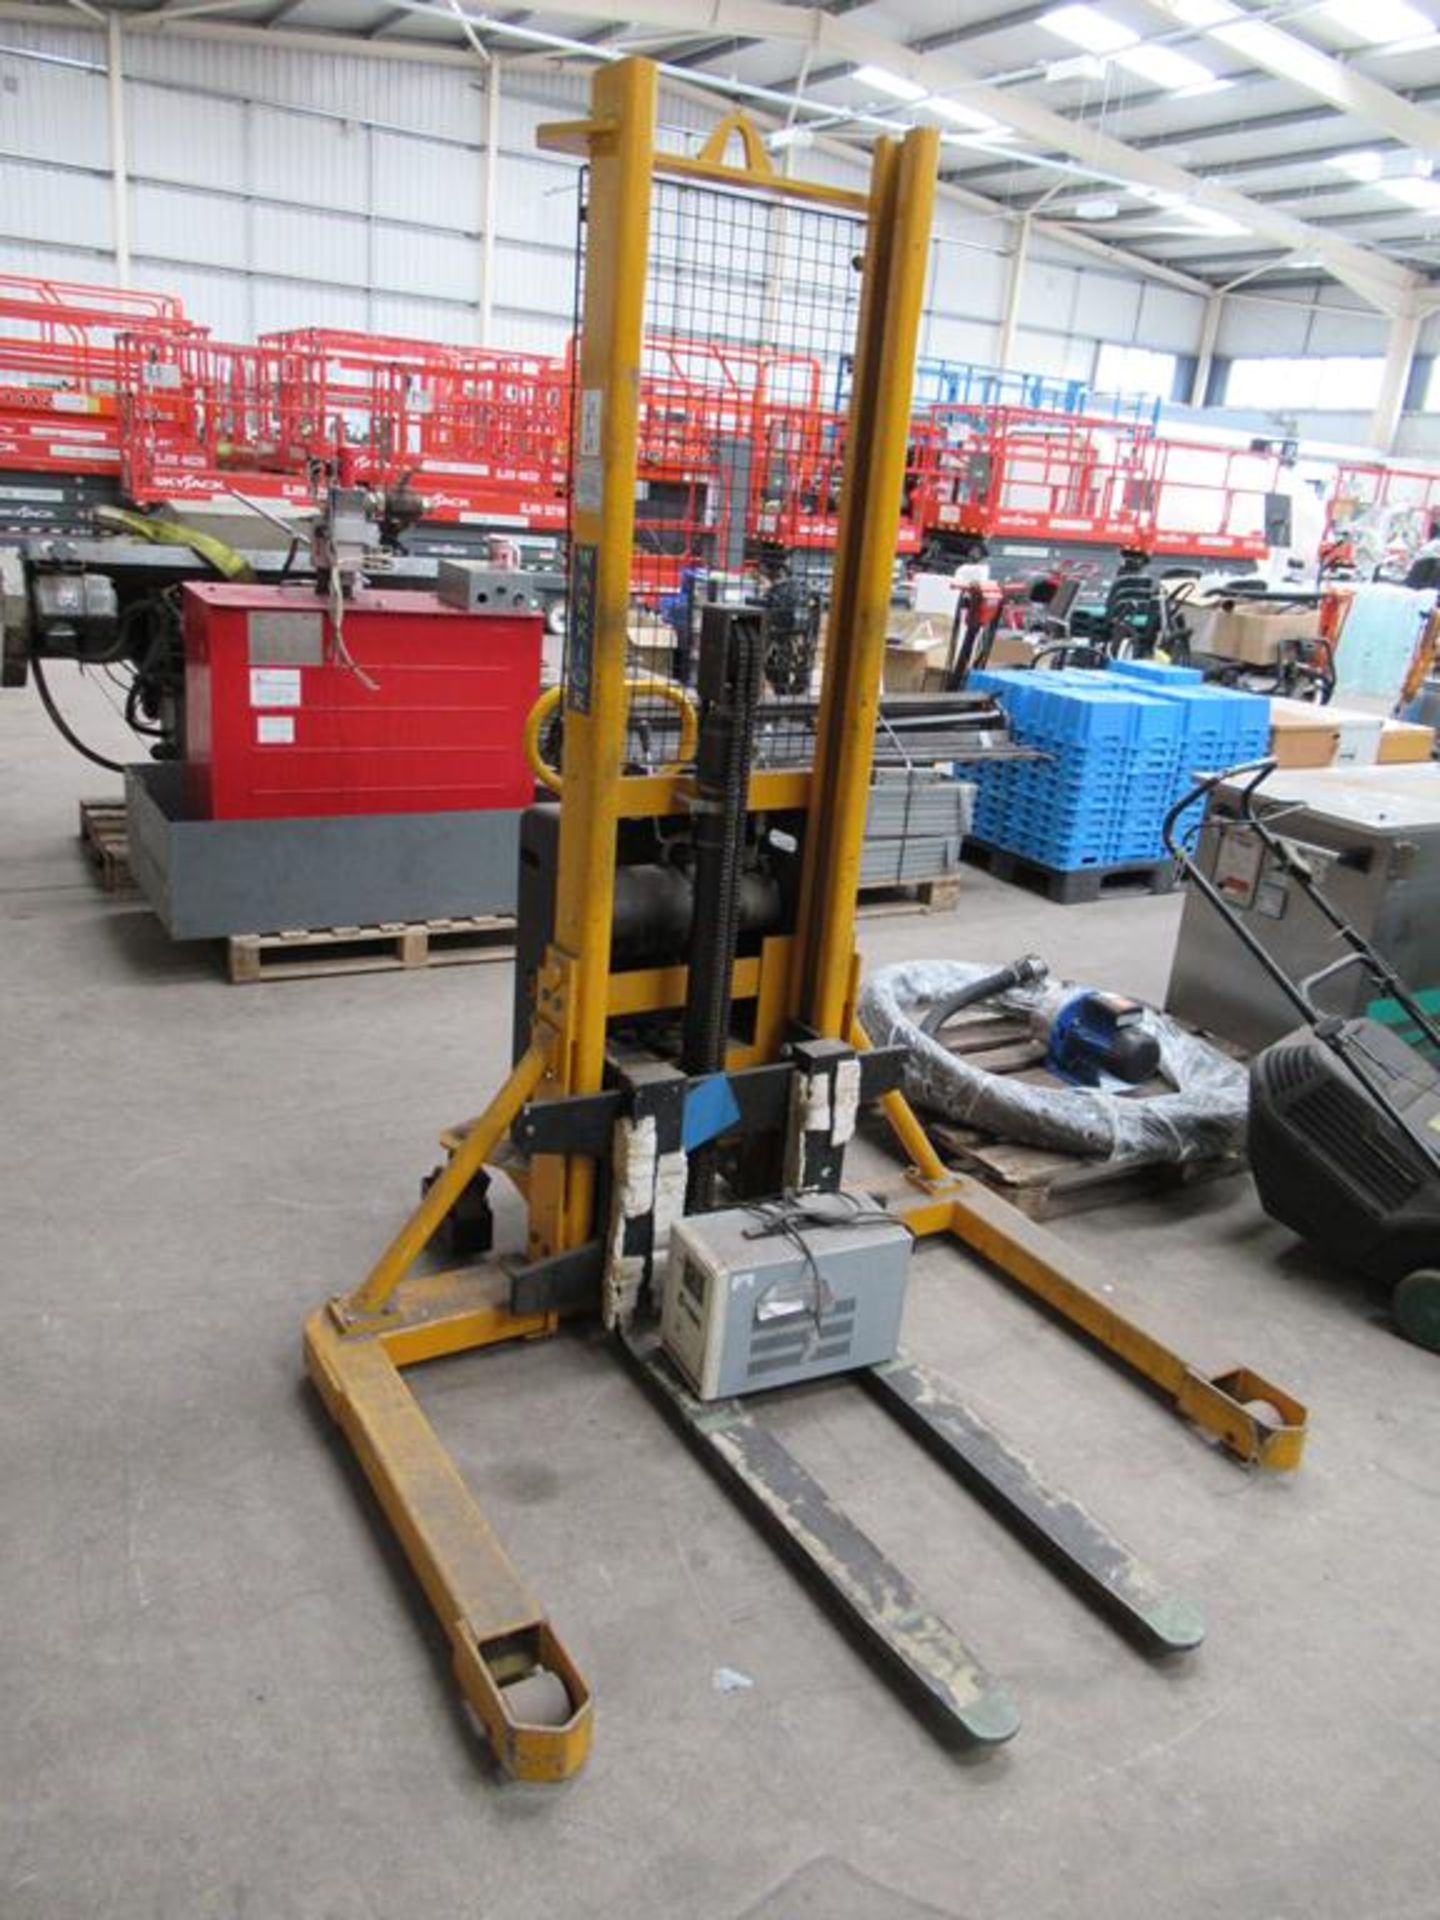 A Warrior Semi-Electric Stacker Pallet Truck 1000Kg max capacity, lifting height 1600mm S/N 01479 YO - Image 2 of 2